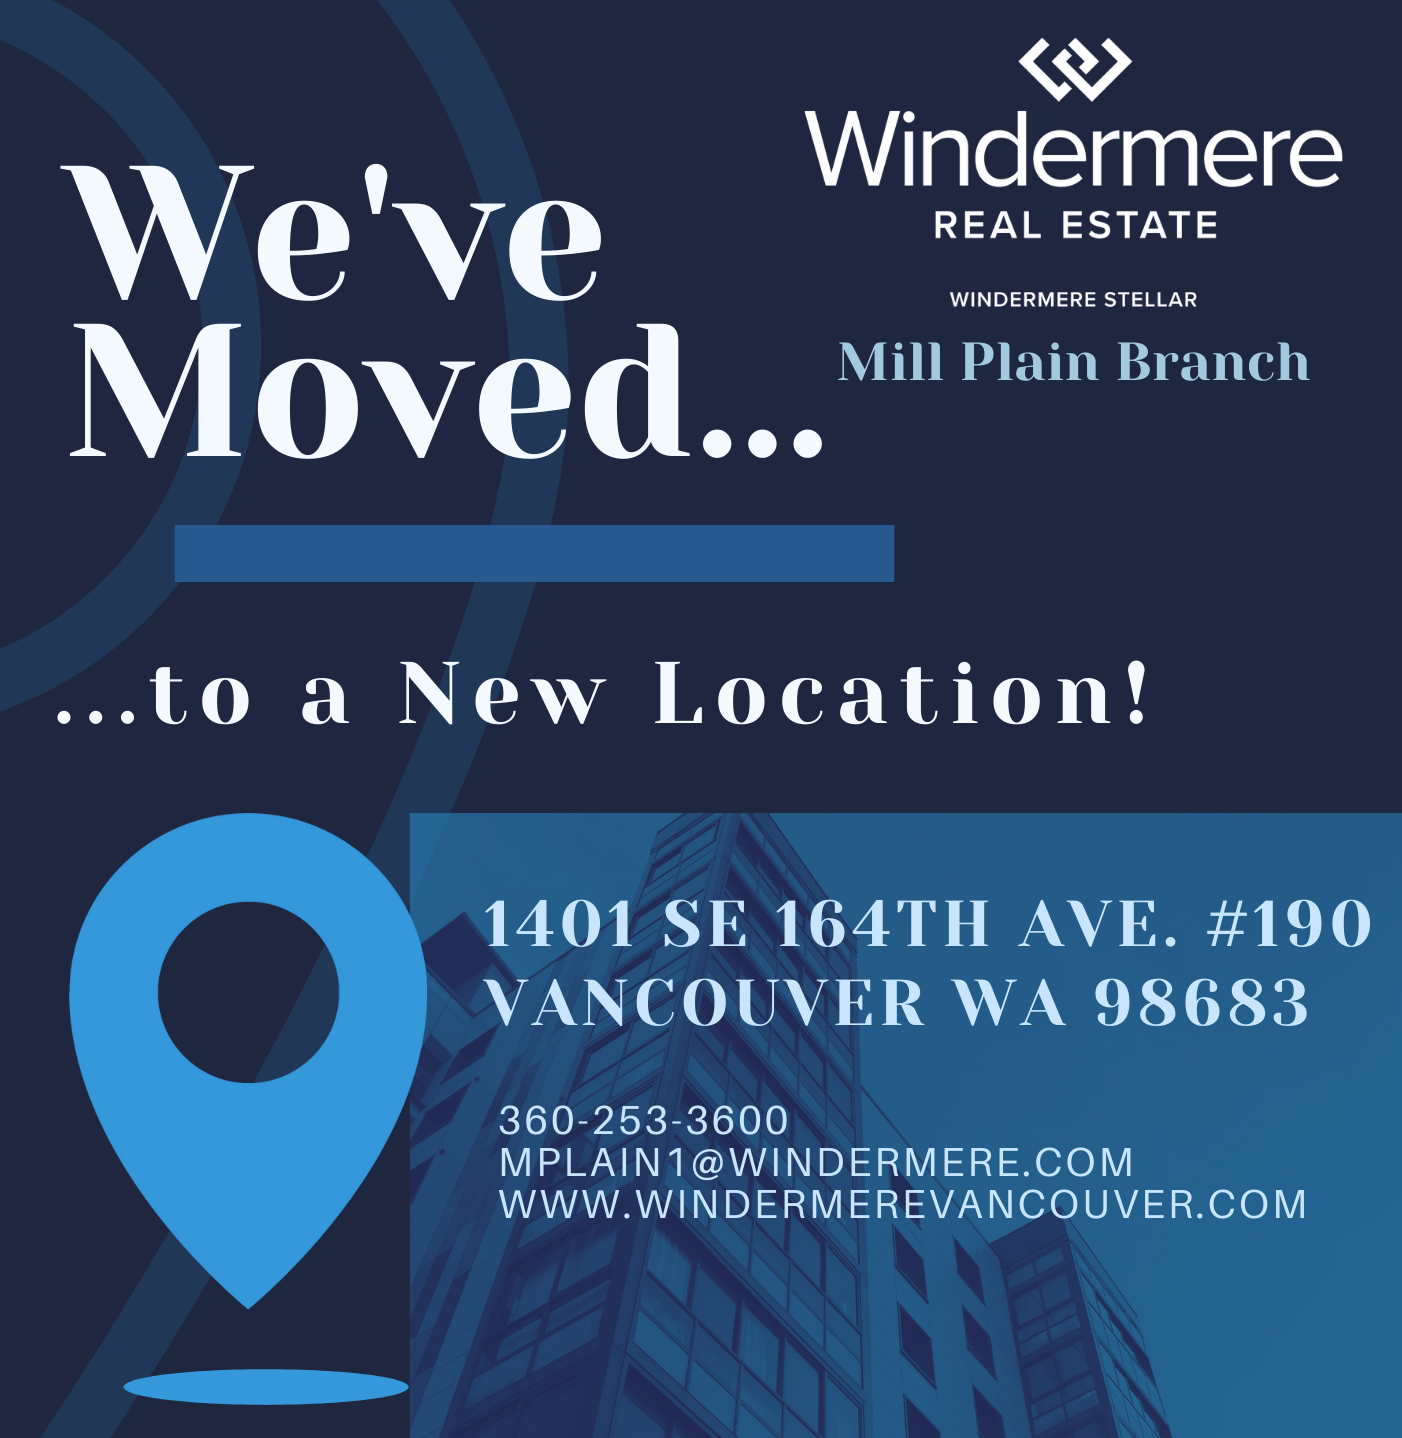 Mill Plain office moved